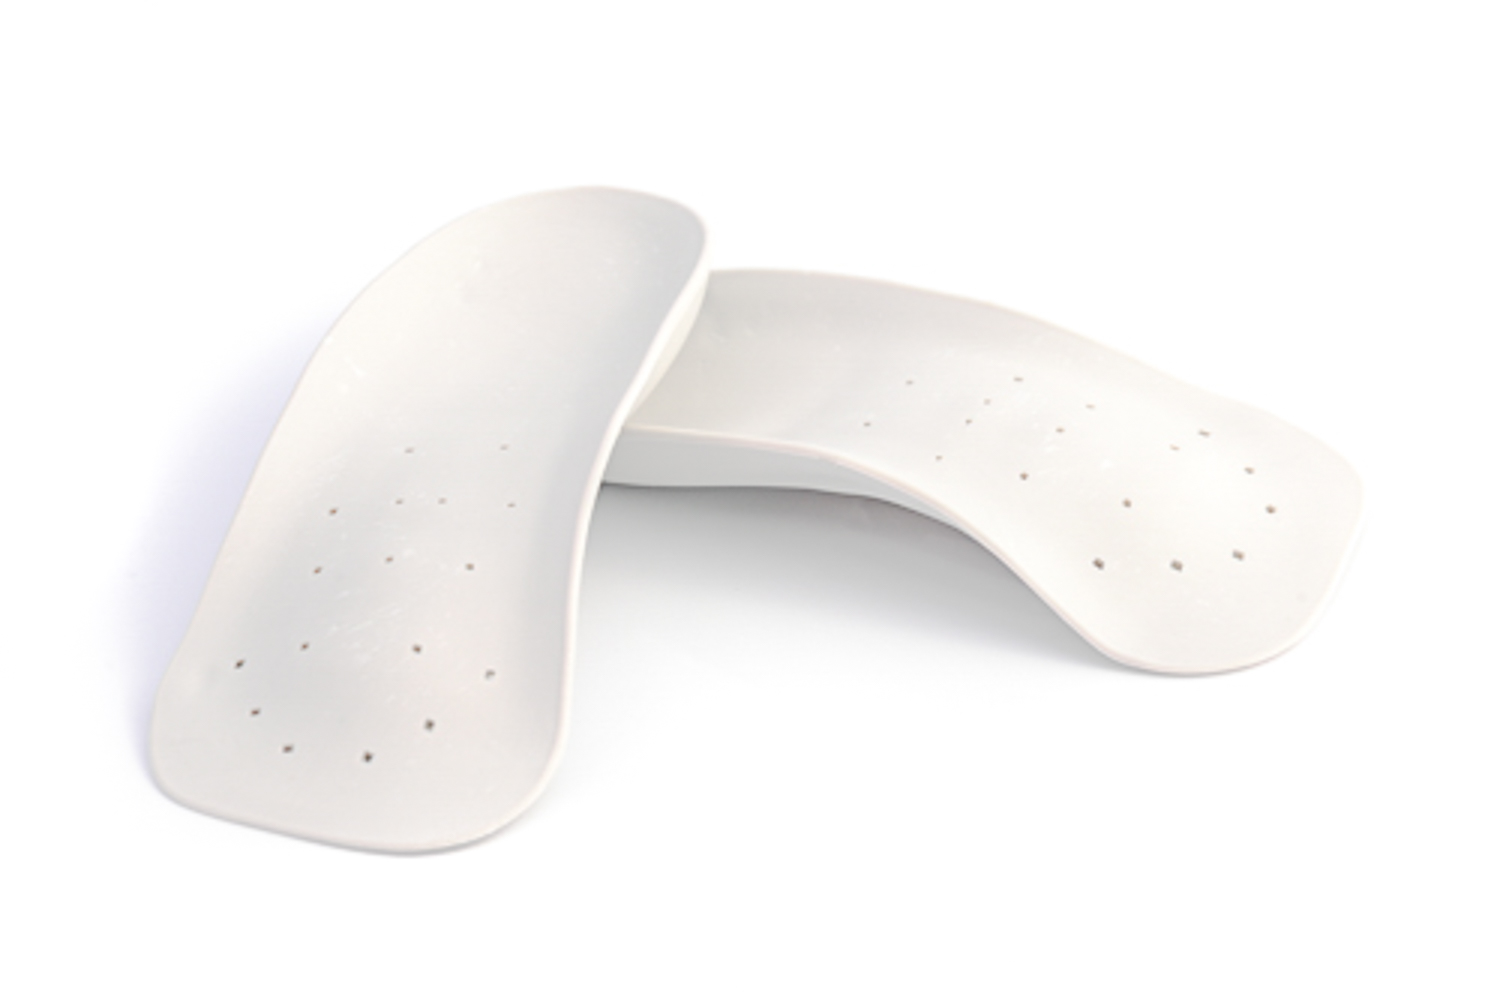 TruFlex Pro, Arch Support, proarchsupports.com, Pro arch supports, pro orthotics, orthotics, arch supports, foot supports, shoe inserts, custom orthotics, custom arch supports,